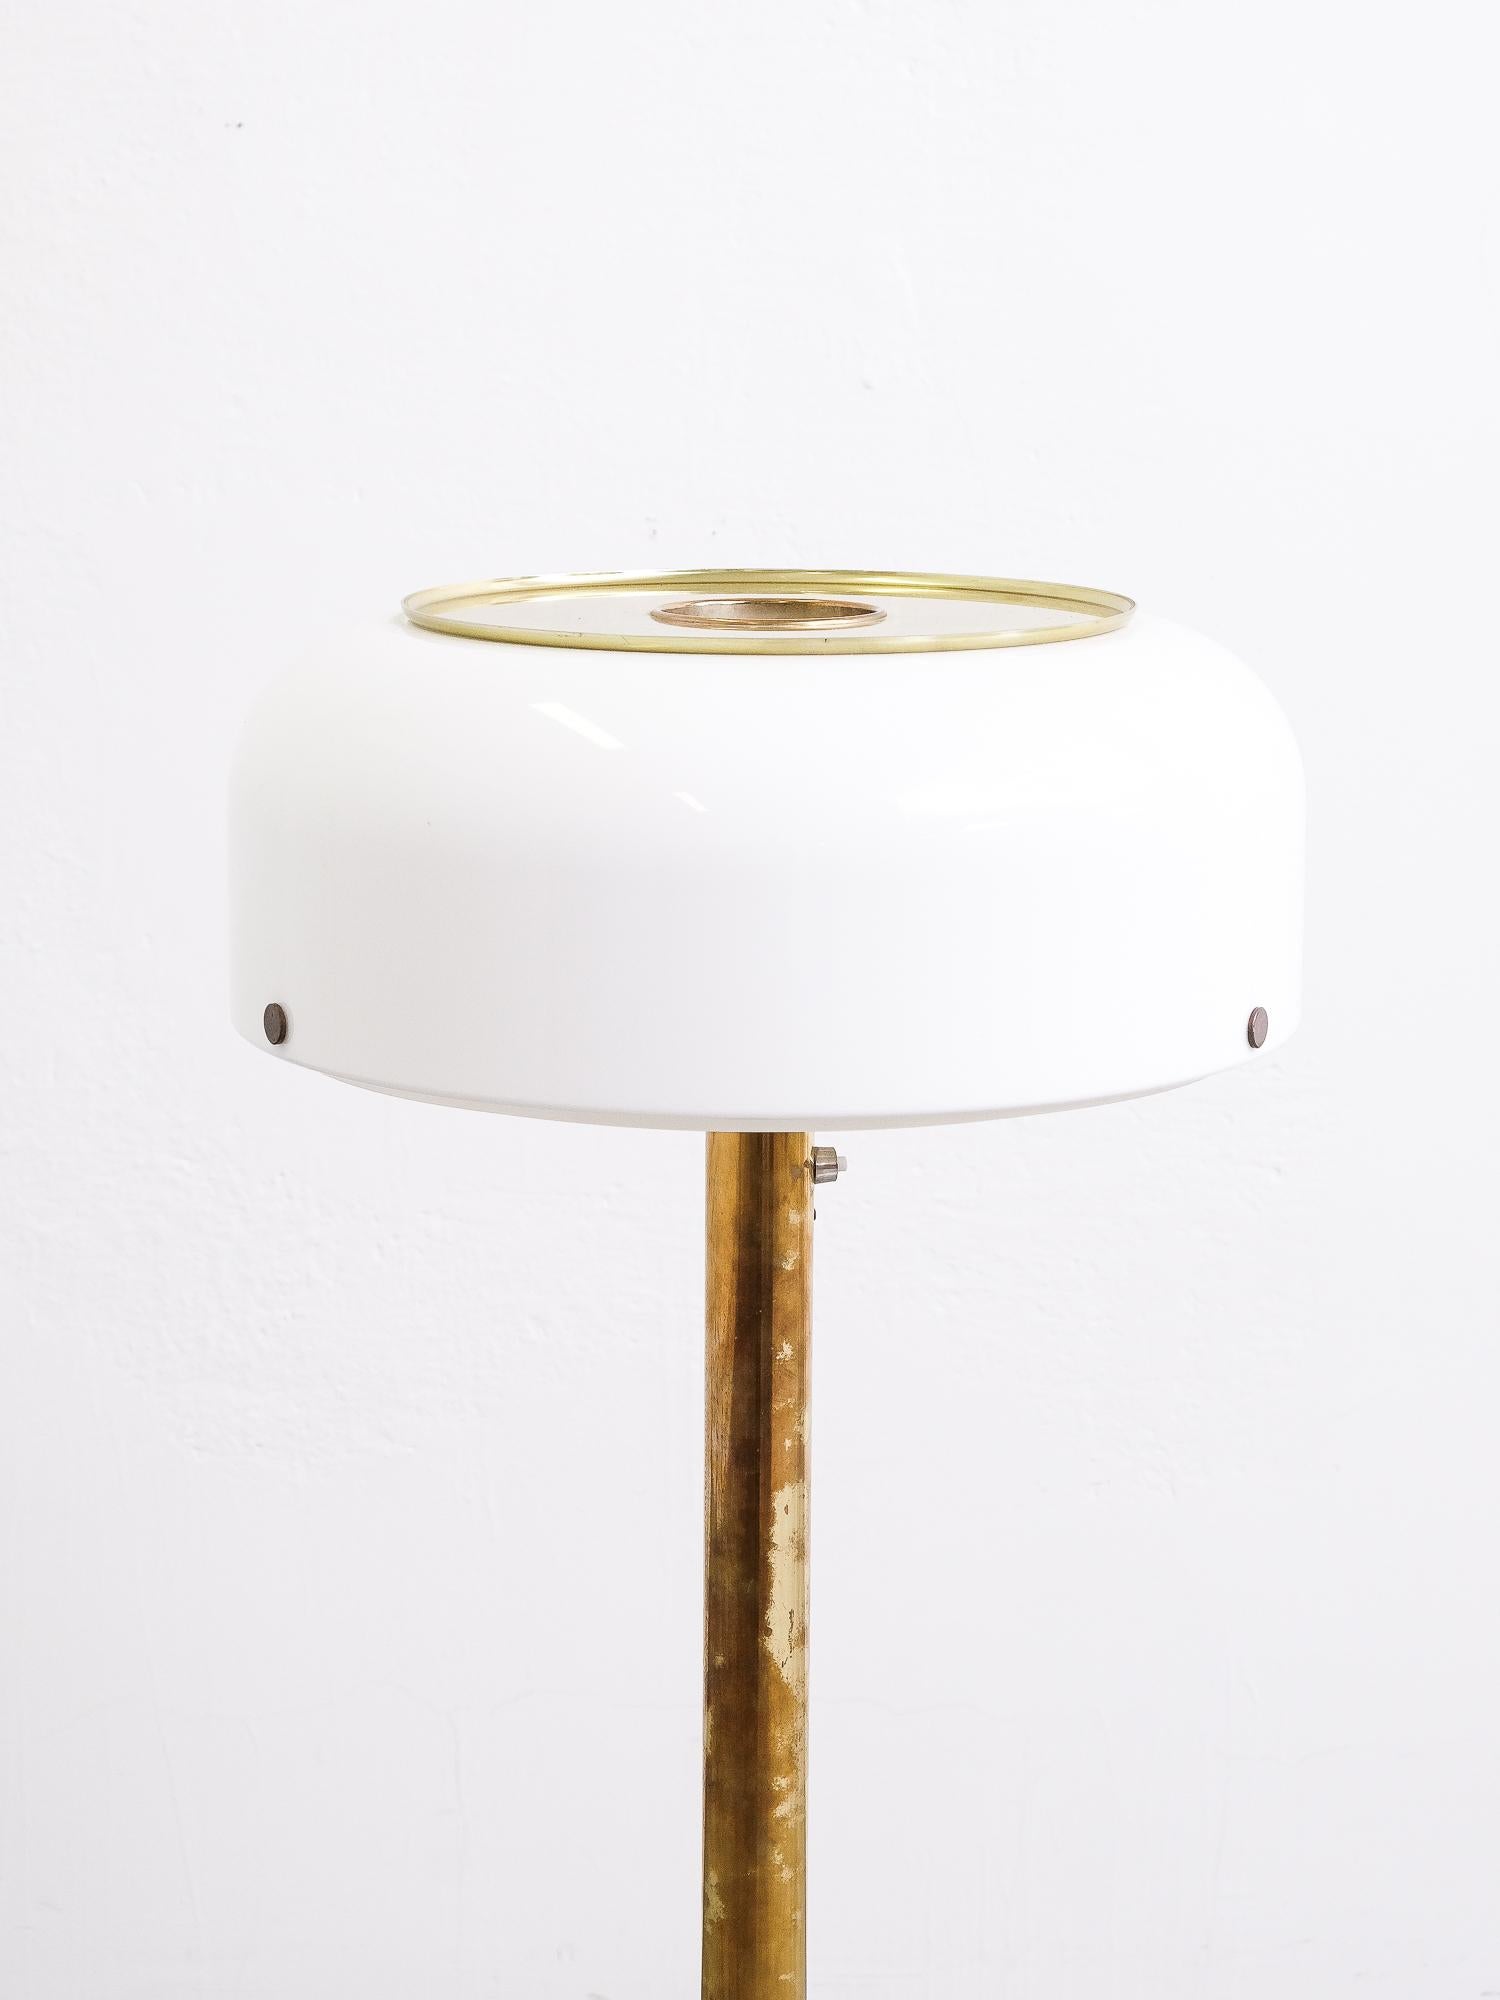 Rare floor lamp model Knubbling designed by Anders Pehrson. Produced by Ateljé Lyktan in Åhus, Sweden.